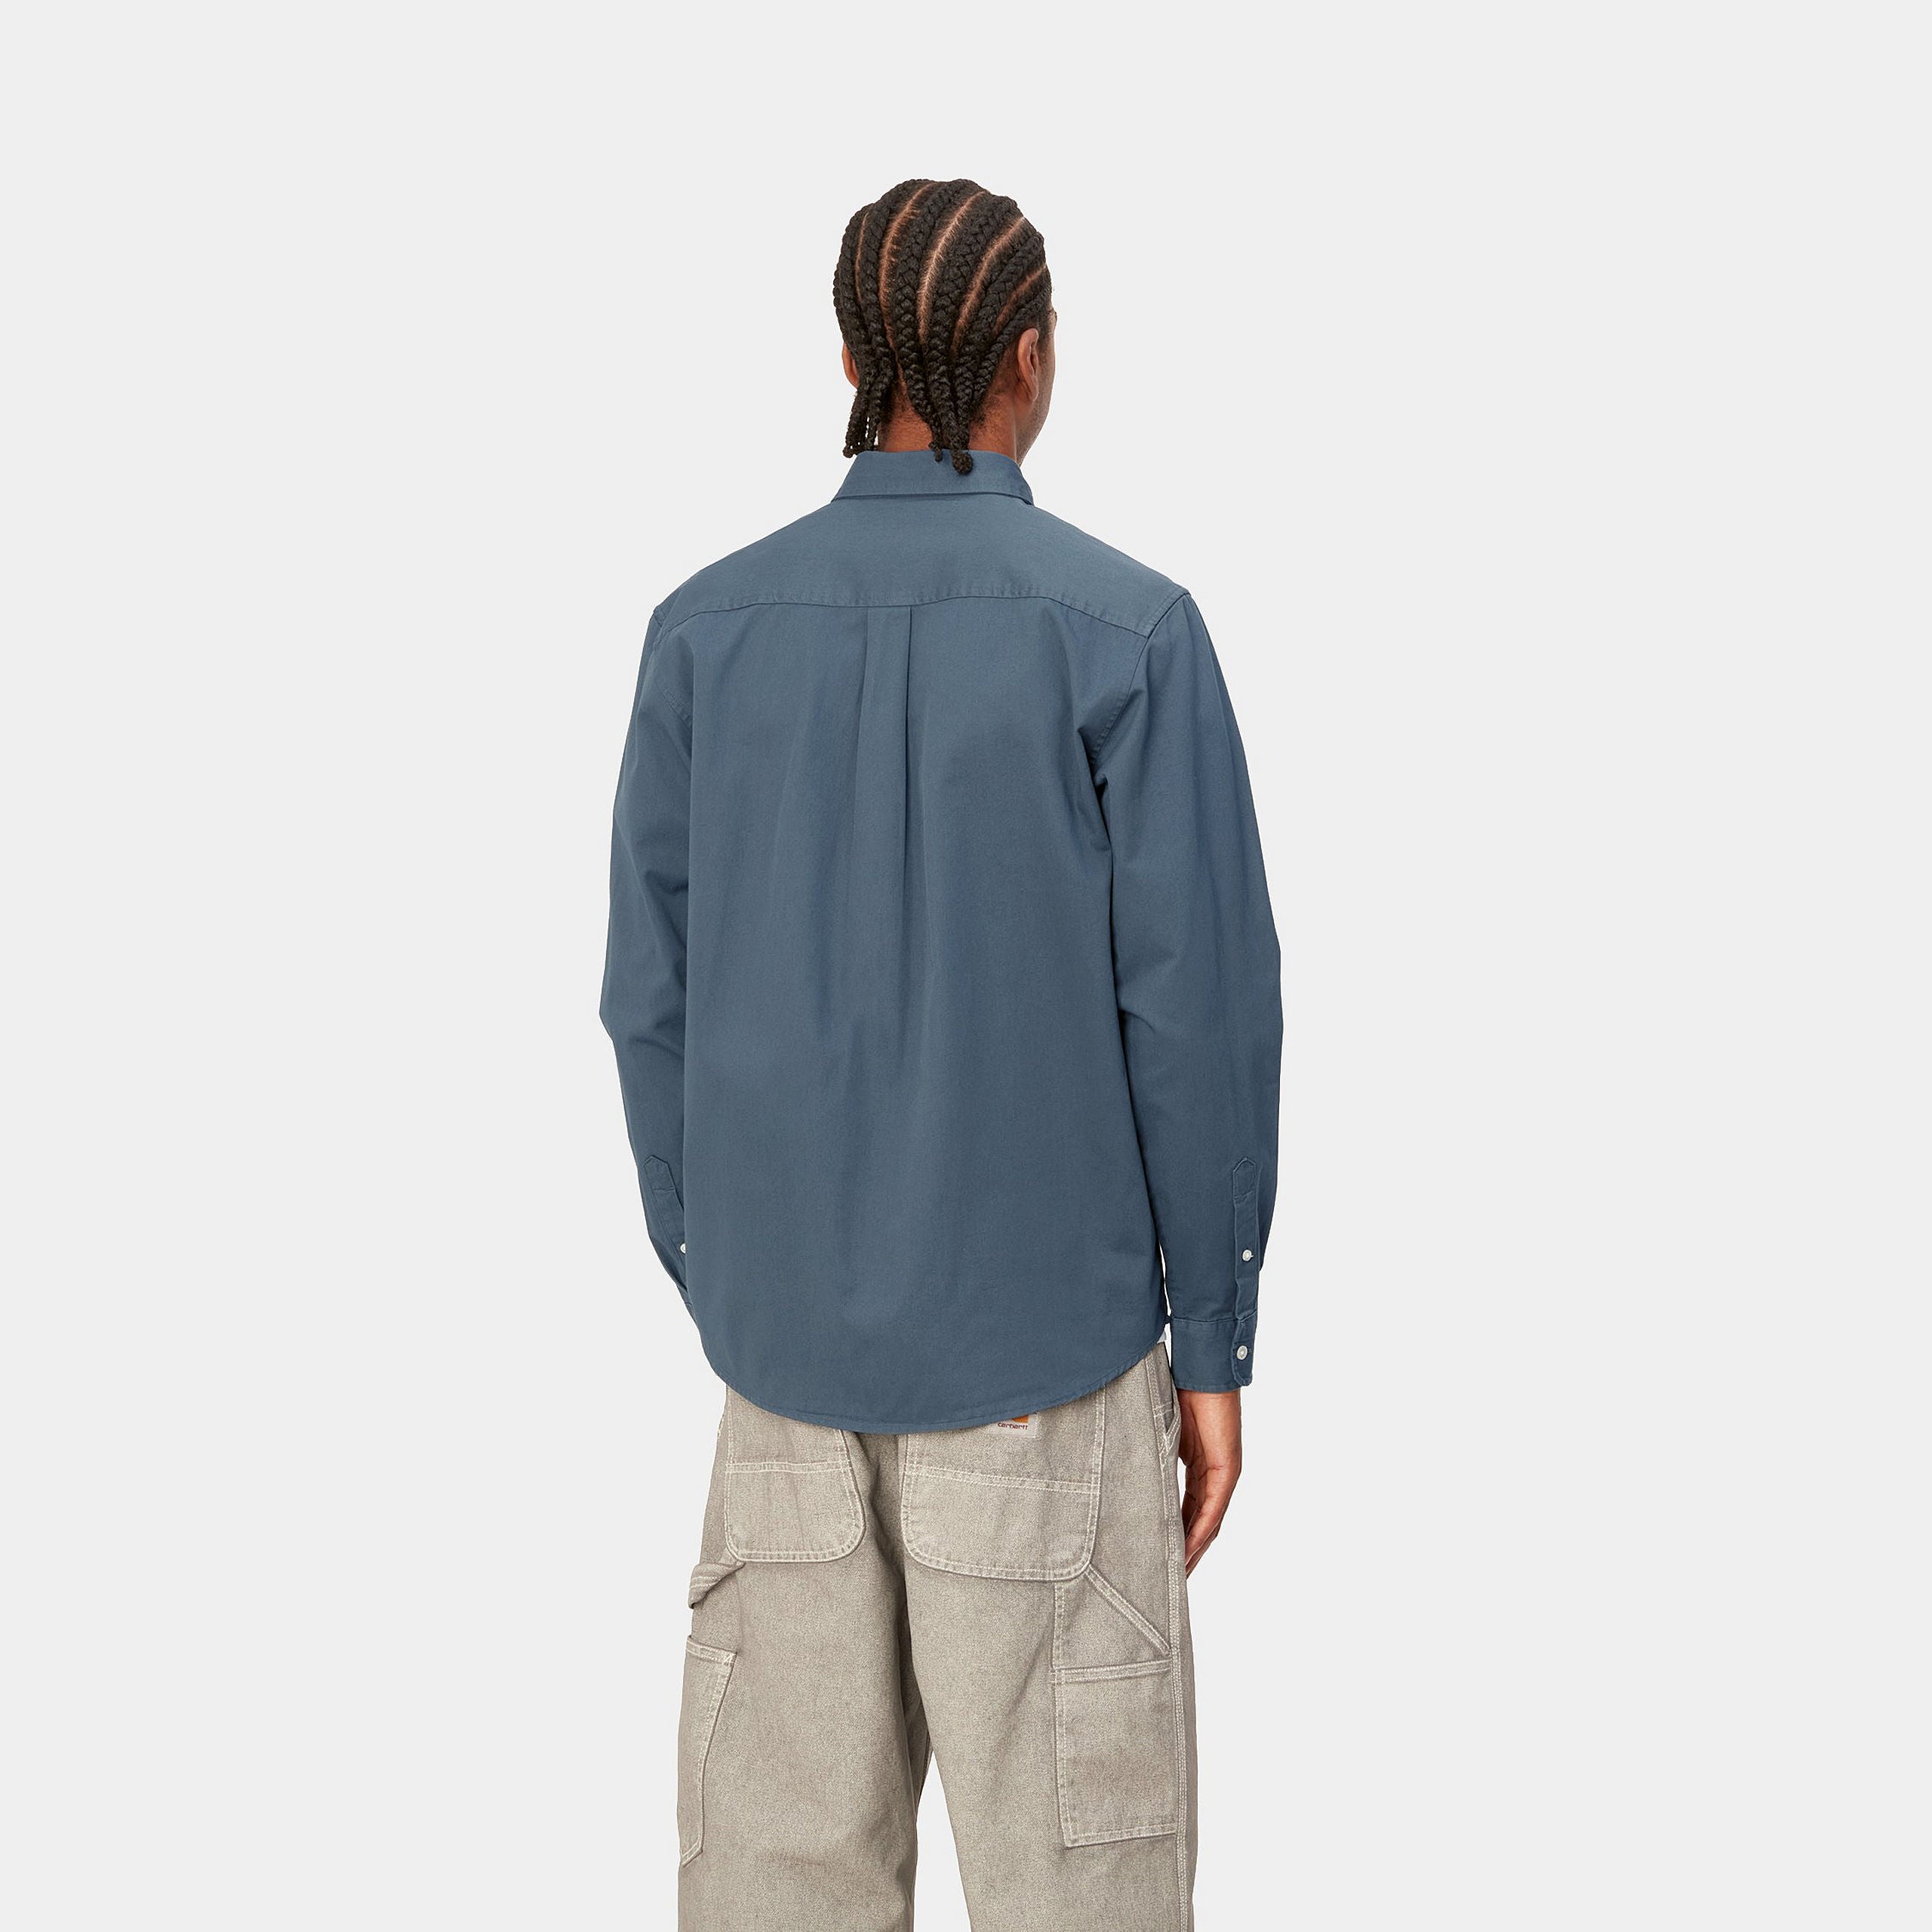 The Carhartt WIP Madison Shirt in a medium blue is a classic button-down shirt crafted from the highest quality mid-weight cotton twill. Pay for your order with Klarna and Paypal